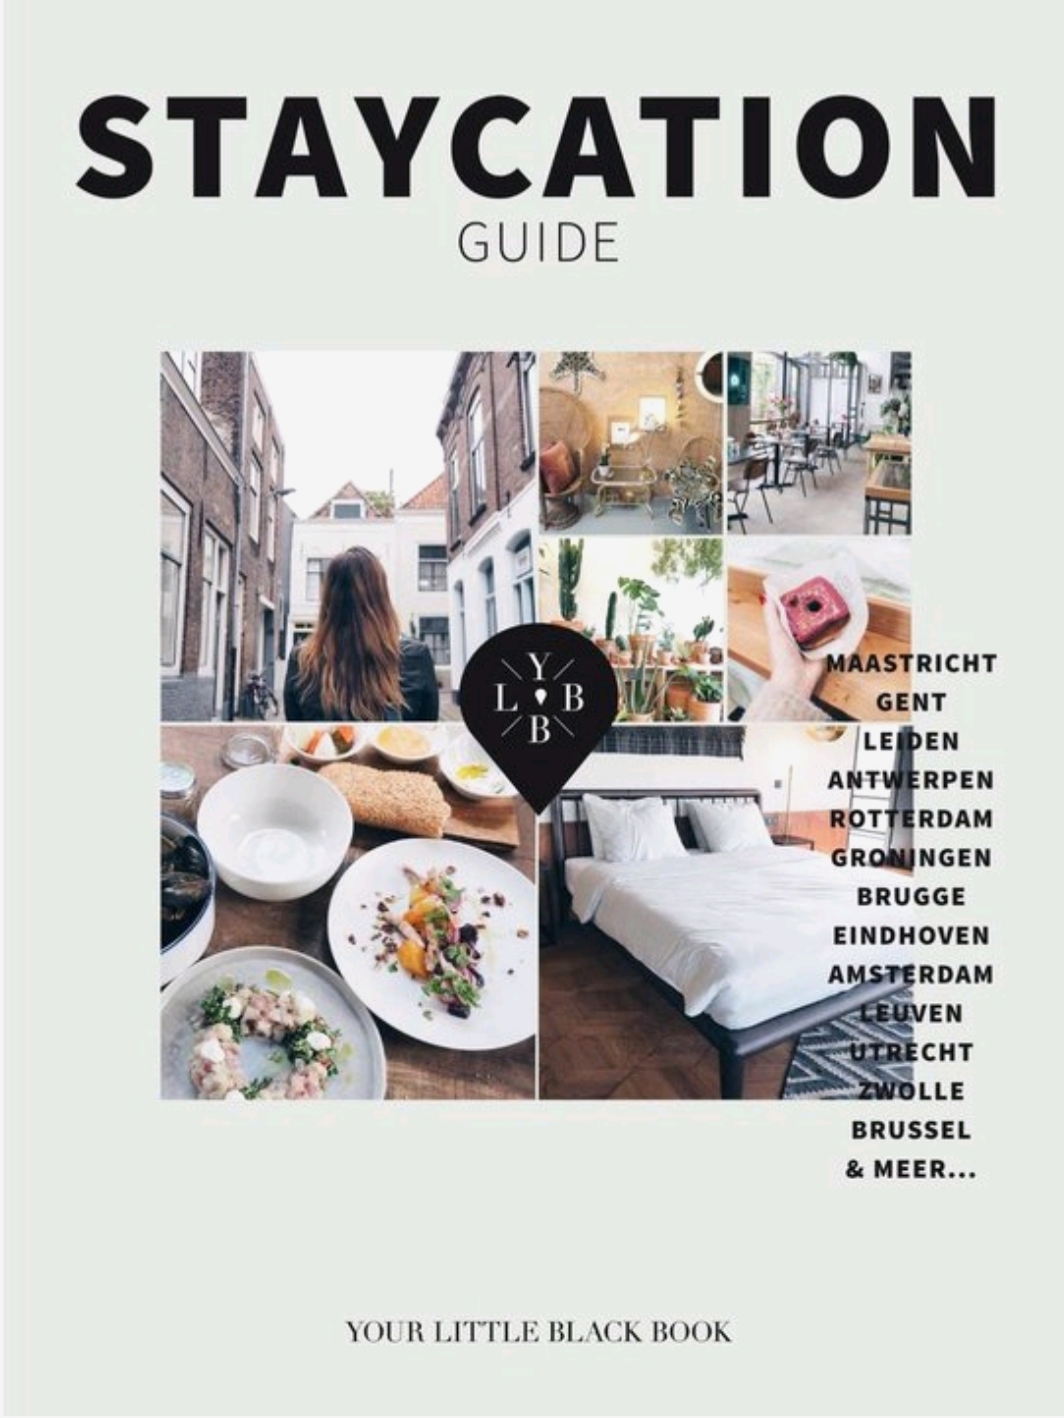 Staycation guide